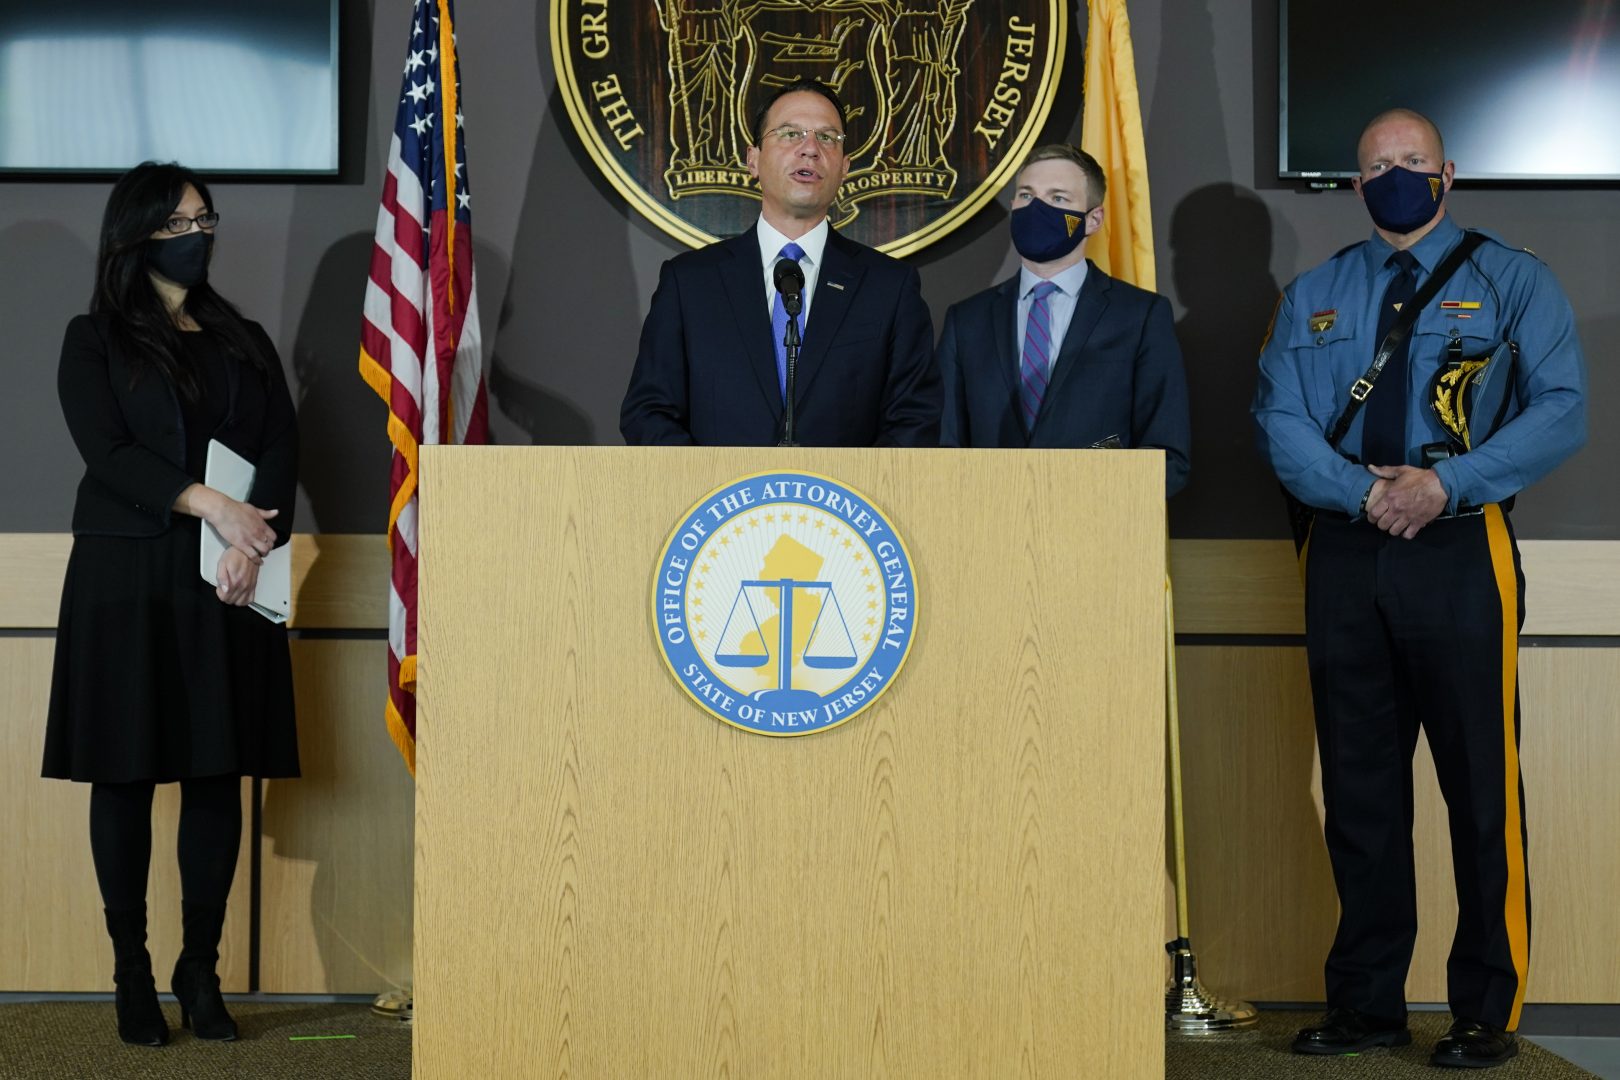 Pennsylvania Attorney General Josh Shapiro, center, speaks, as from left, Lyndsay Ruotolo, Director, New Jersey Division of Criminal Justice, New Jersey acting Attorney General Andrew Bruck, and New Jersey State Police Maj. Frederick Fife listen during a news conference regarding ghost guns, Friday, Oct. 29, 2021,  in Ewing, N.J. (AP Photo/Matt Rourke)